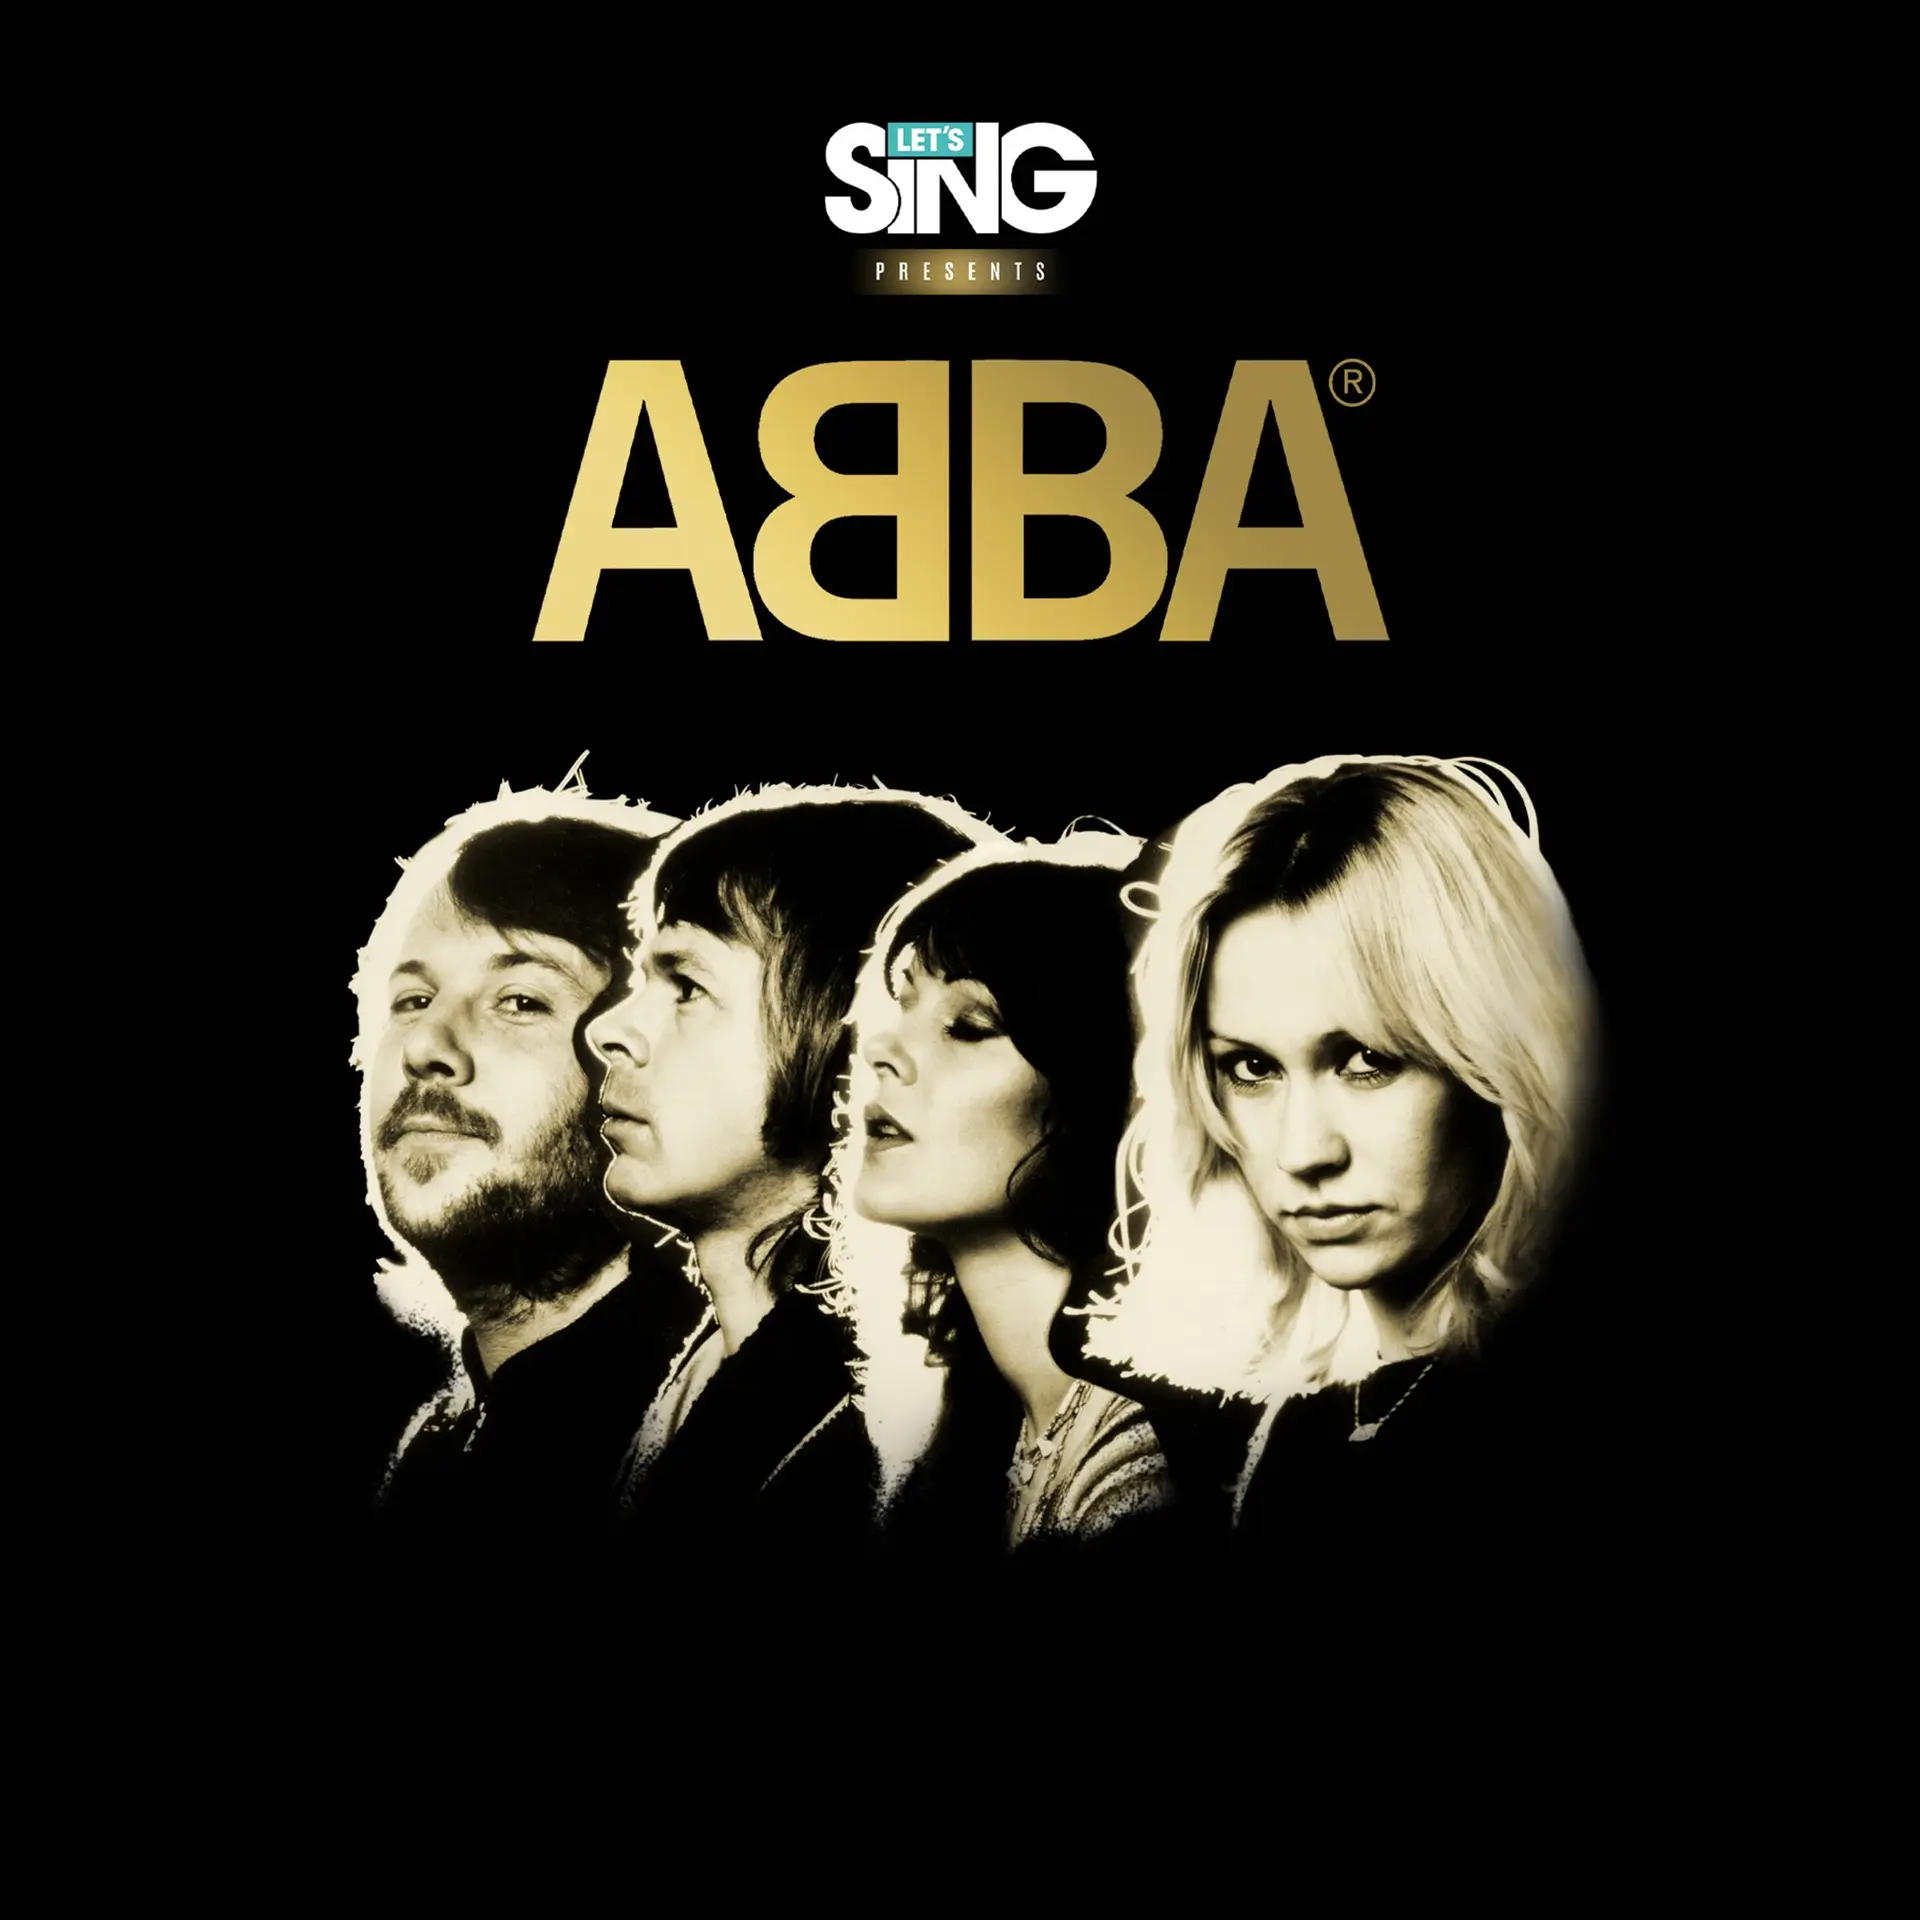 Let's Sing ABBA (Xbox Games US)